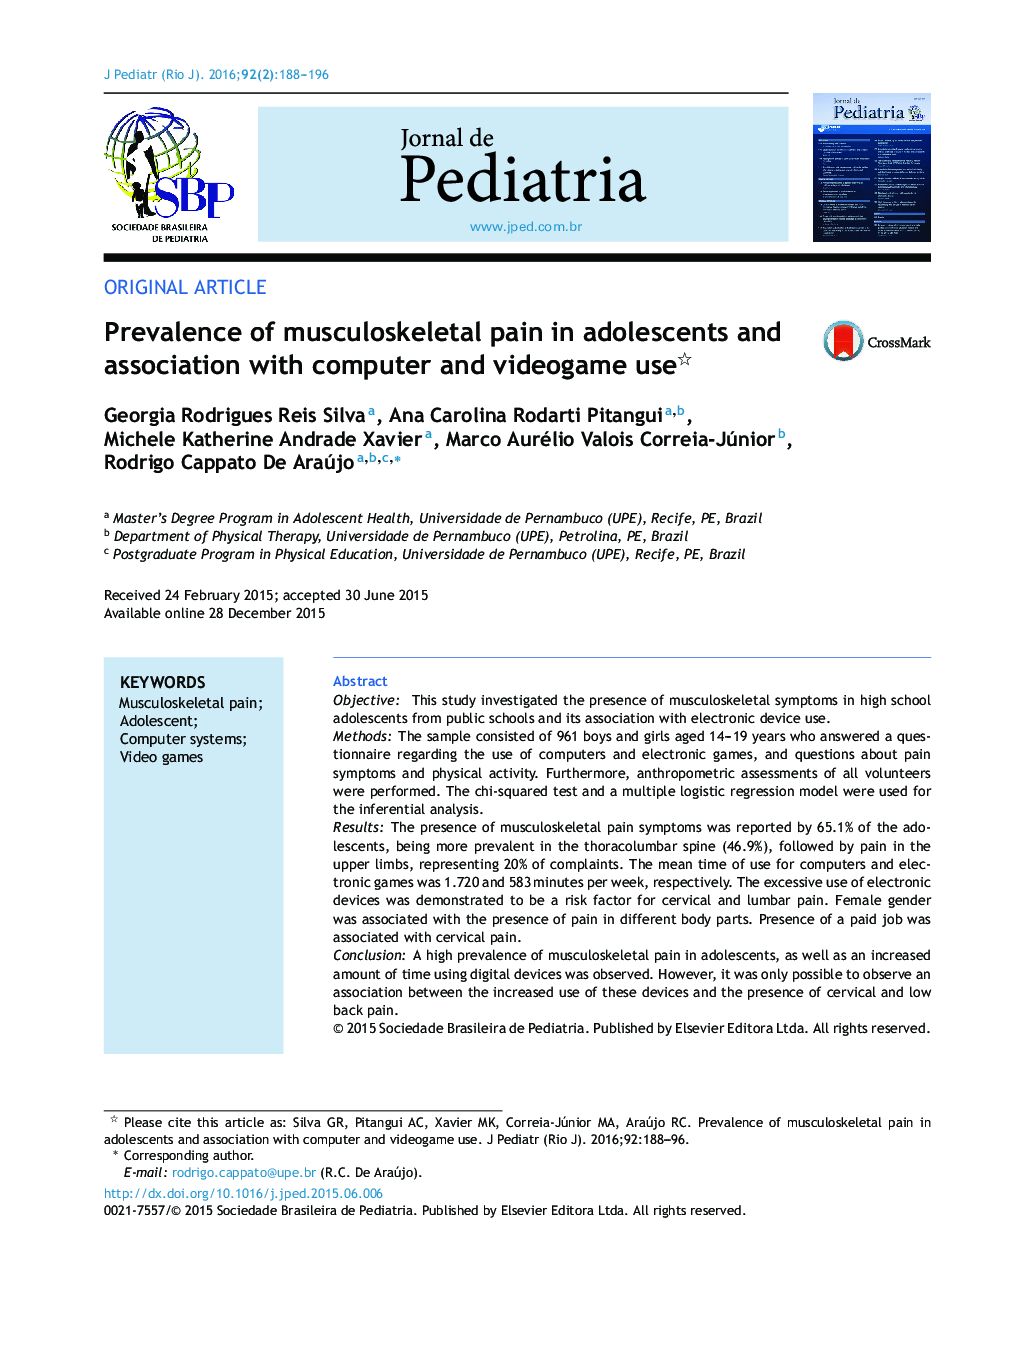 Prevalence of musculoskeletal pain in adolescents and association with computer and videogame use 